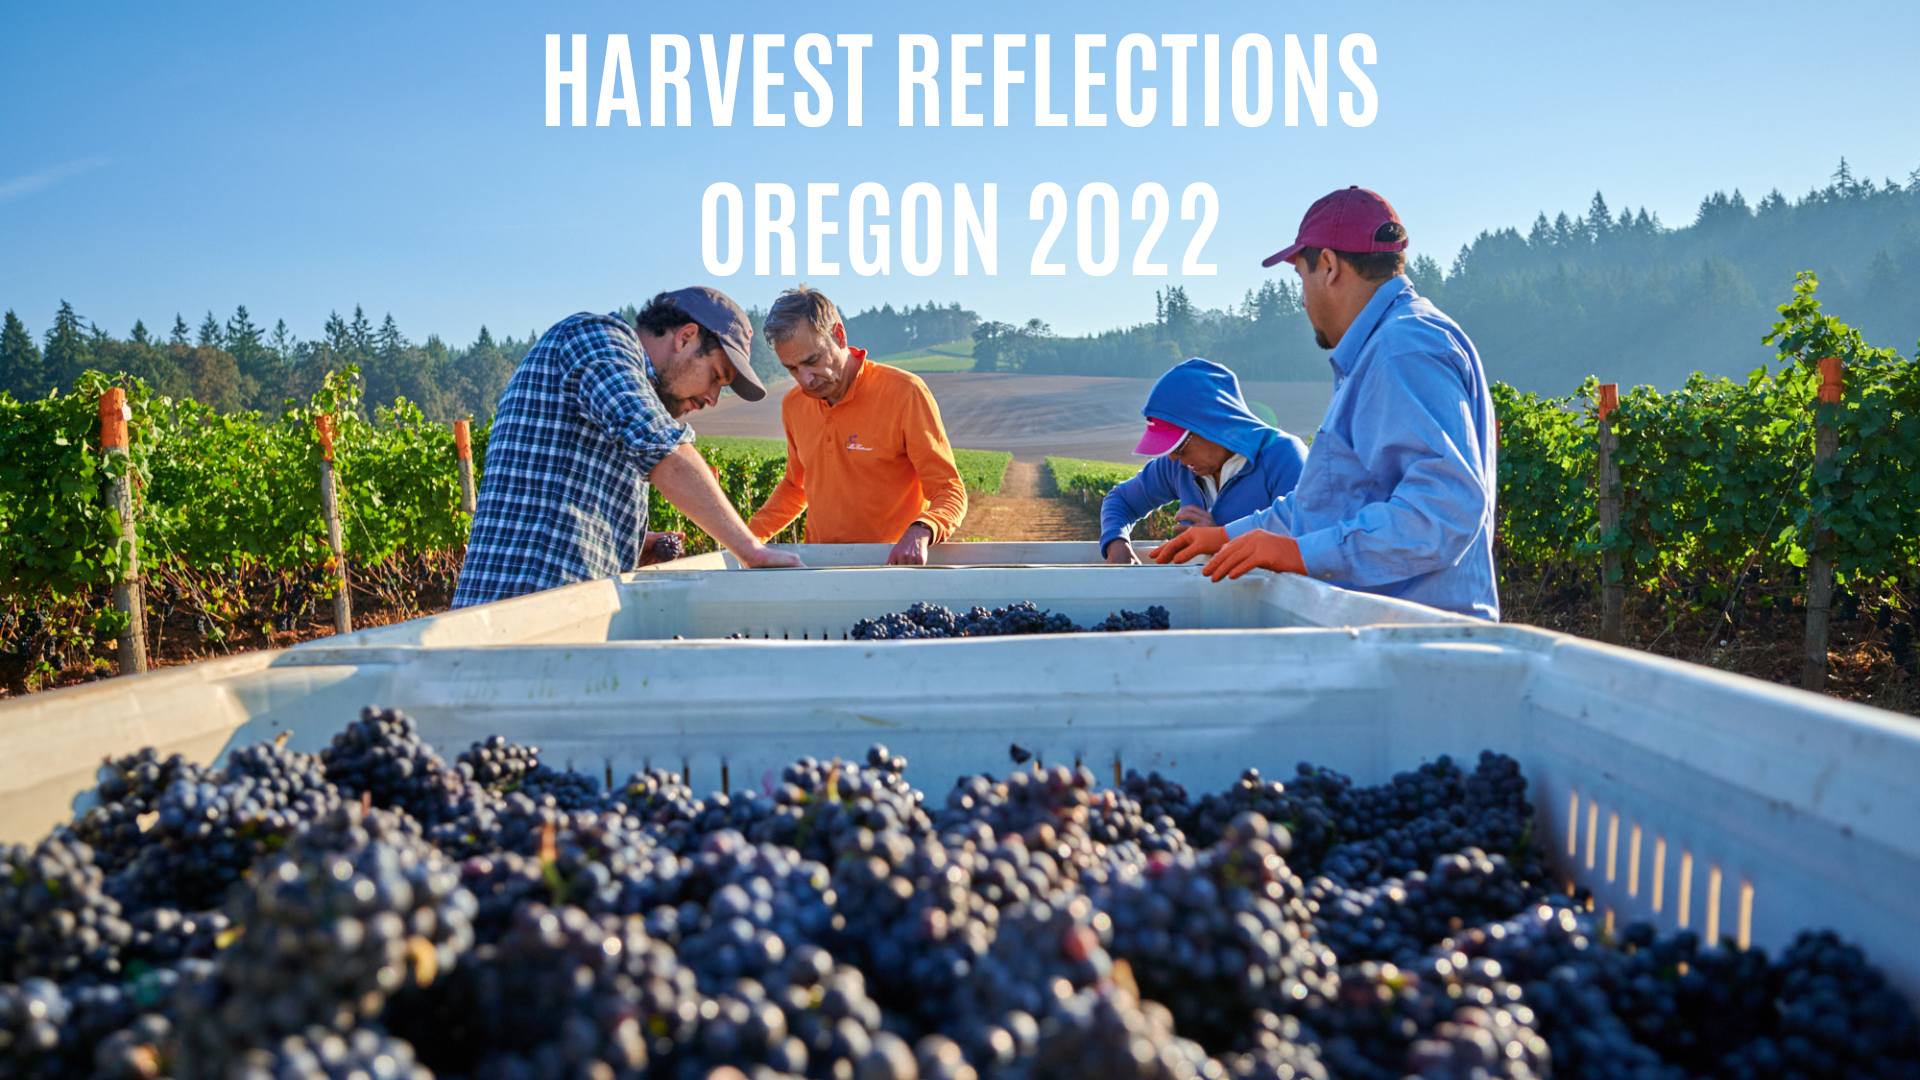 A Year to Remember: Reflections on Oregon’s 2022 Harvest